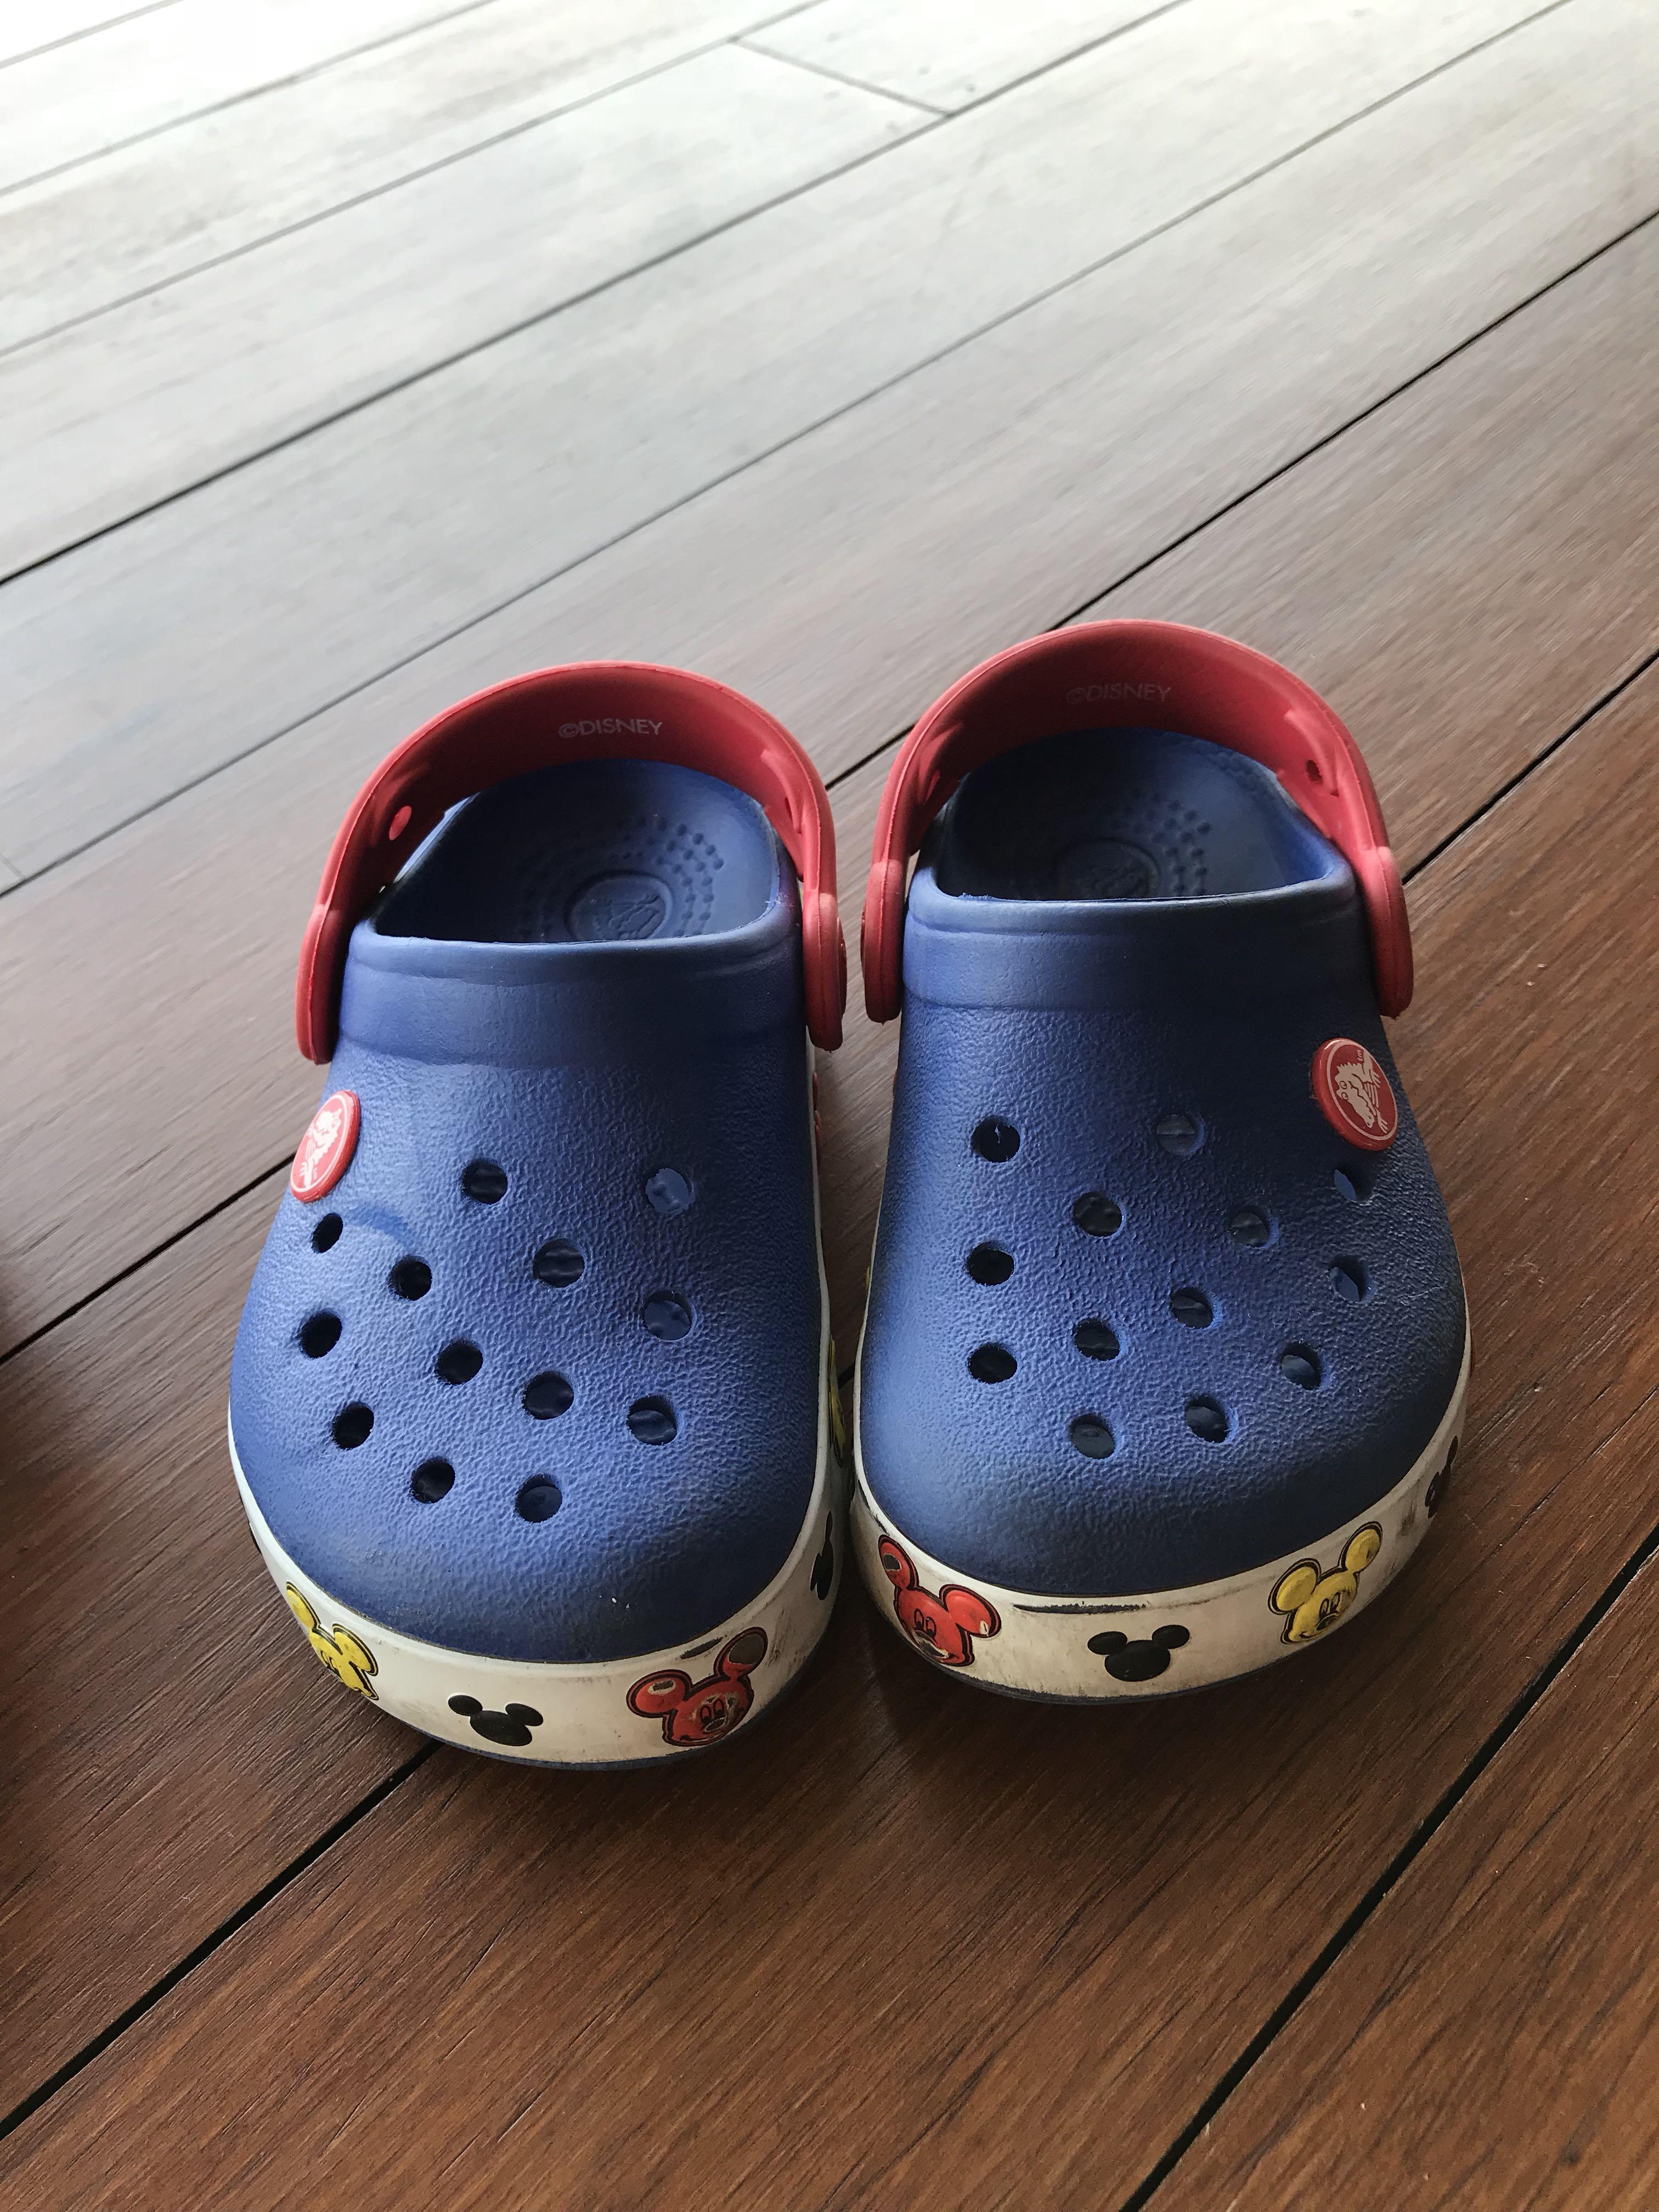 crocs for 8 year old boy